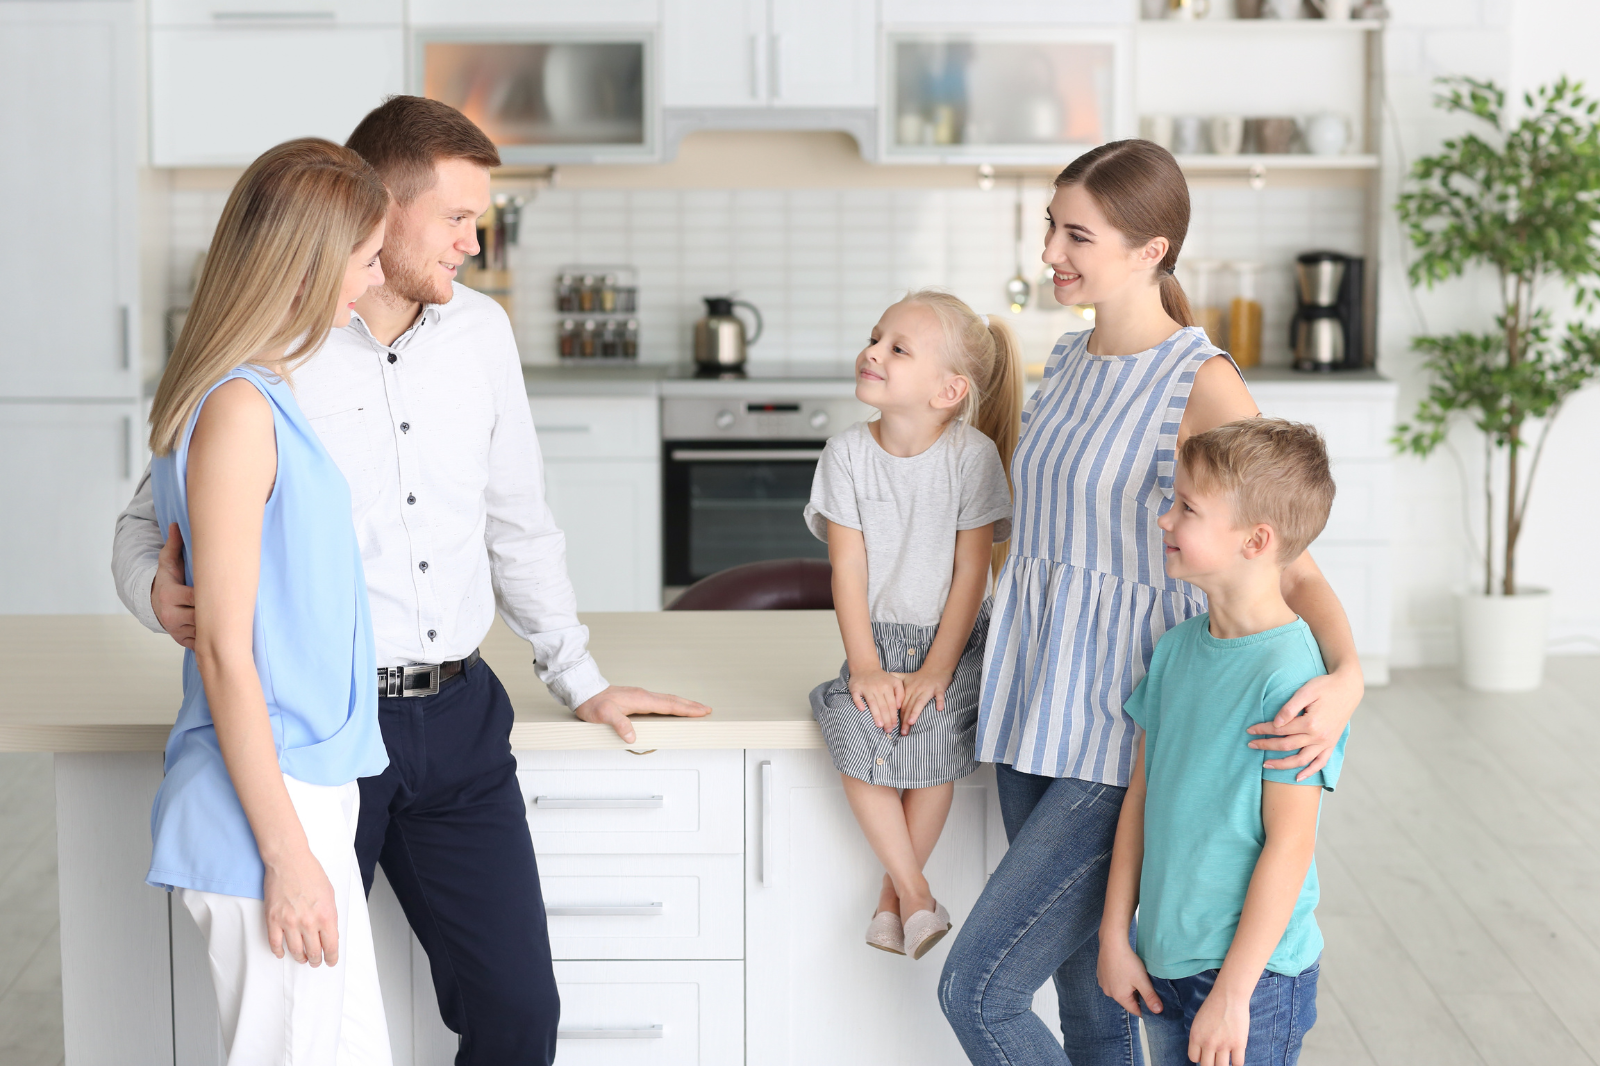 A family with two children and a nanny gathering together in the kitchen.